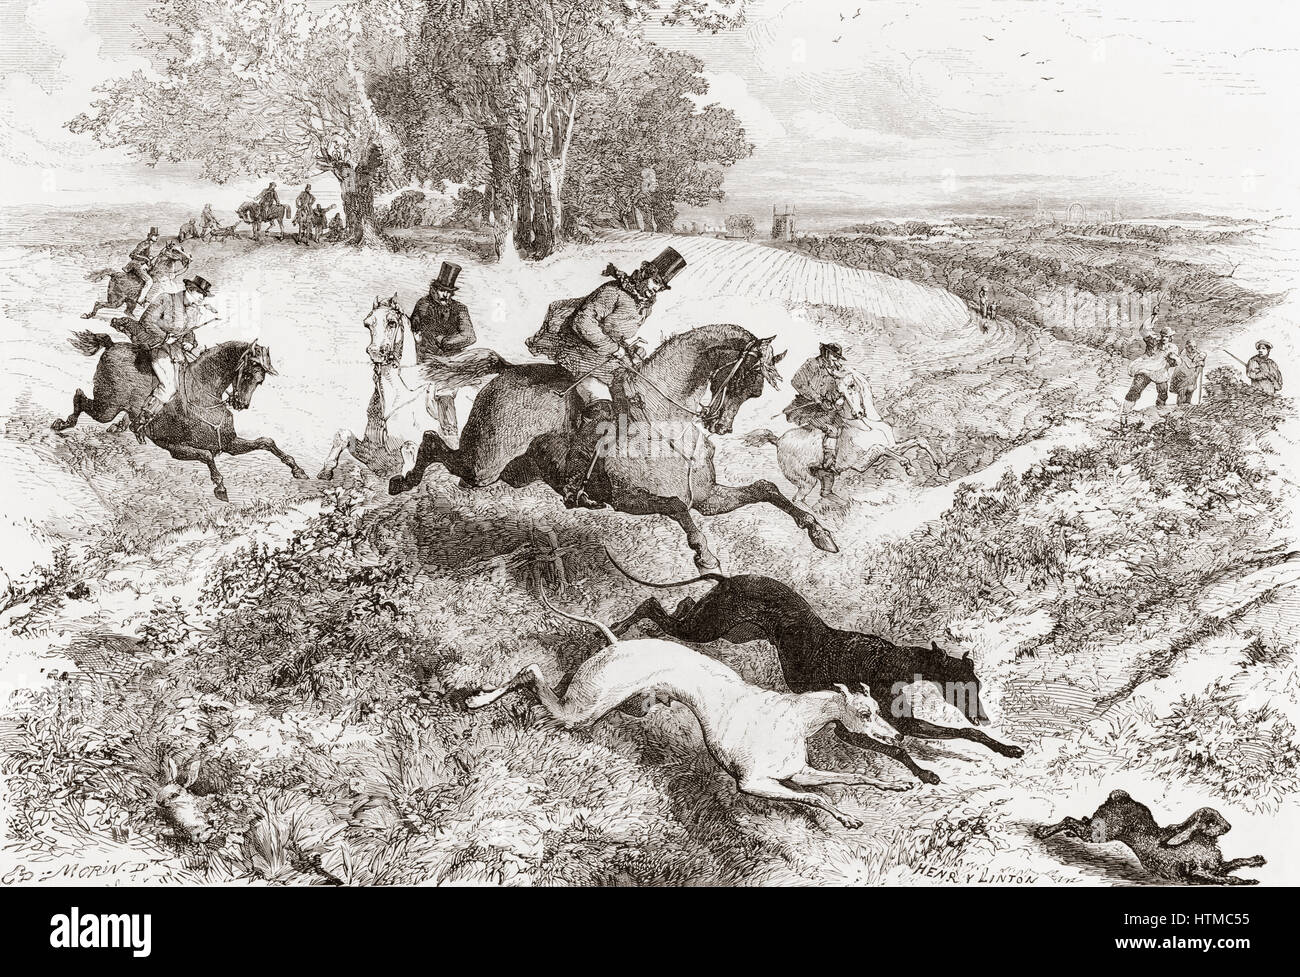 Hare coursing, the pursuit of hares with greyhounds, in England in the 19th century.  From Album-Evenement, Prime du Journal L'Evenement, published 1865. Stock Photo